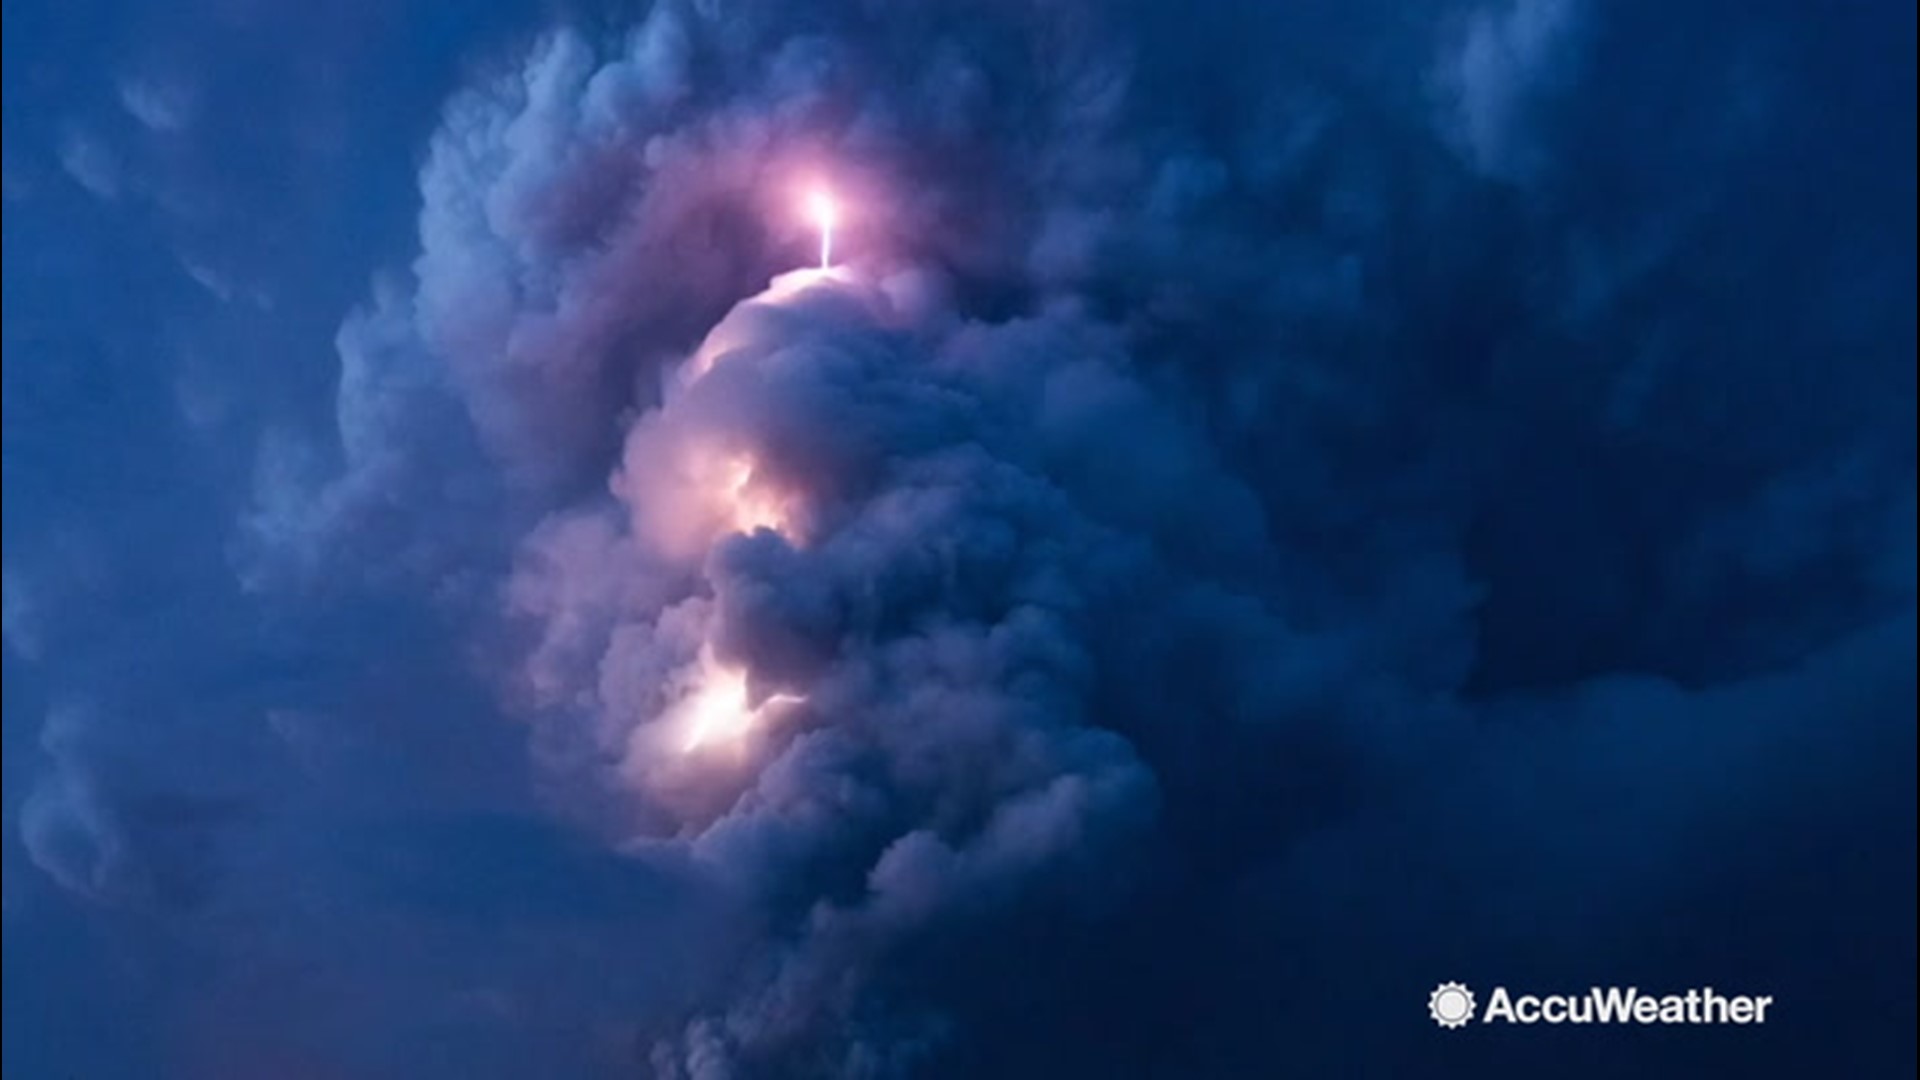 The eruption of the Taal volcano launched ash high up into the air, triggering a lightning storm from within the clouds on Jan. 12.